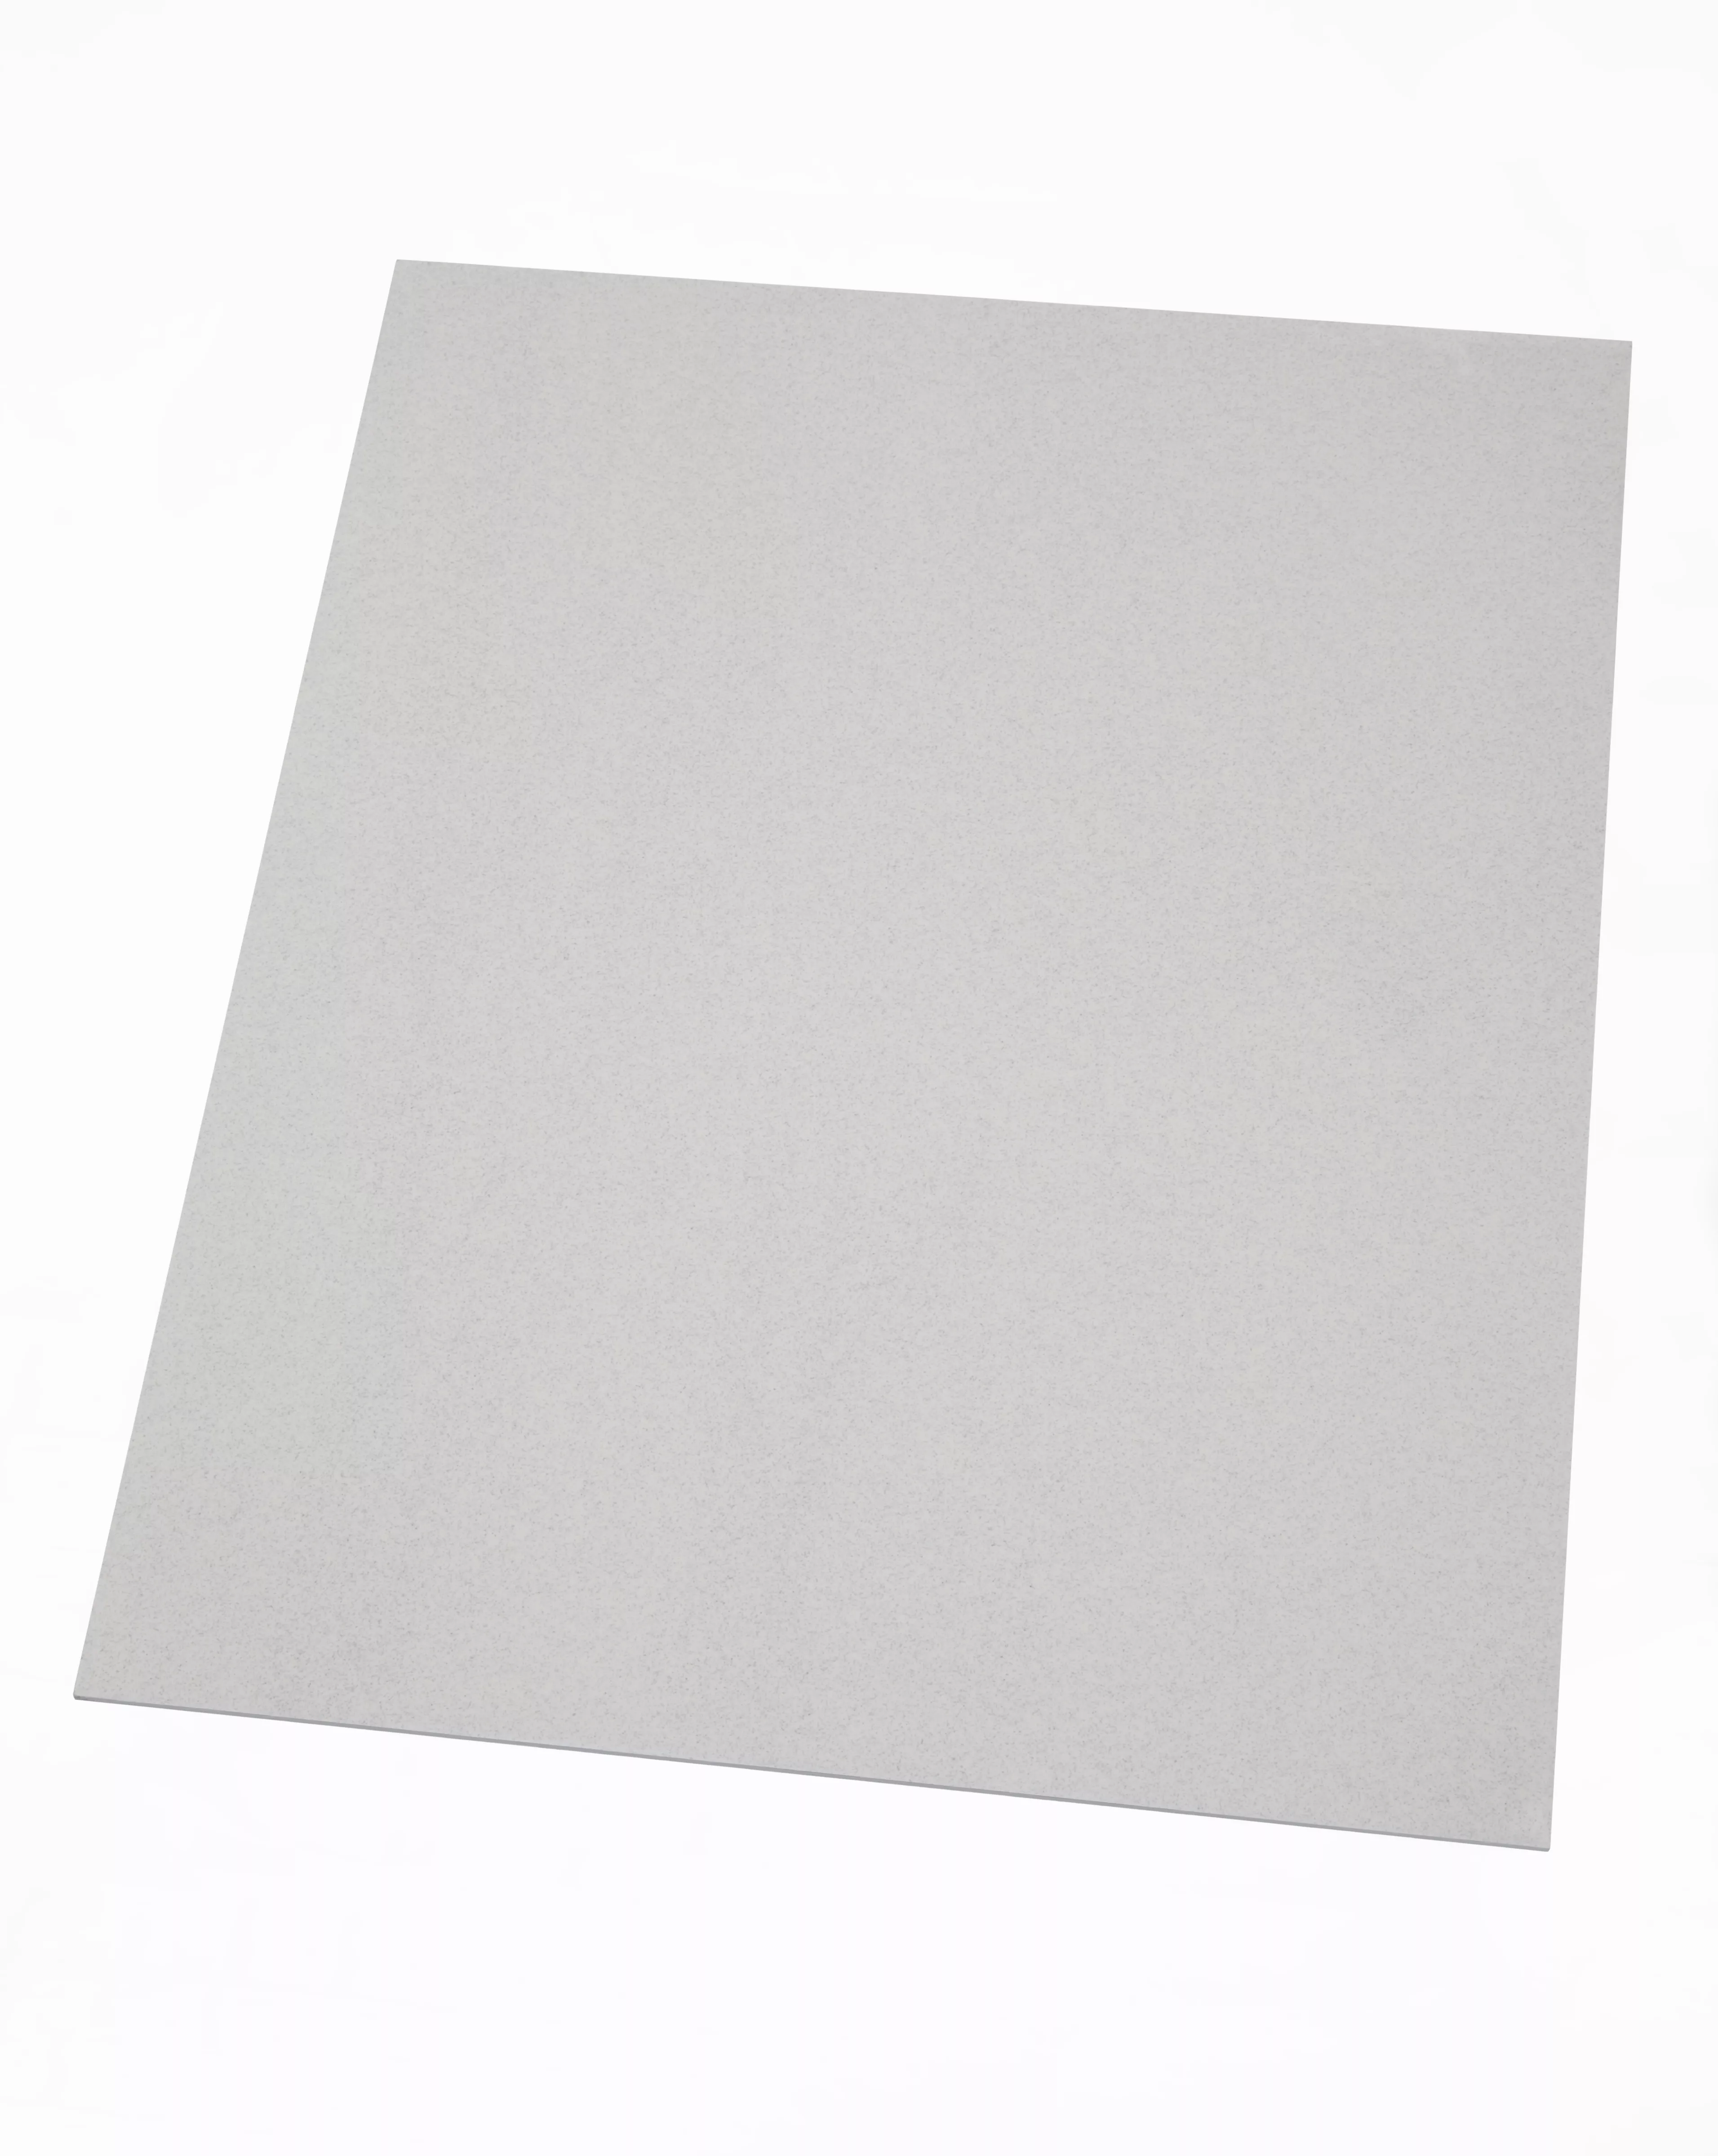 3M™ Thermally Conductive Acrylic Interface Pad 5589H-15, 240 mm x 20 m x
1.5 mm, 1 per Case